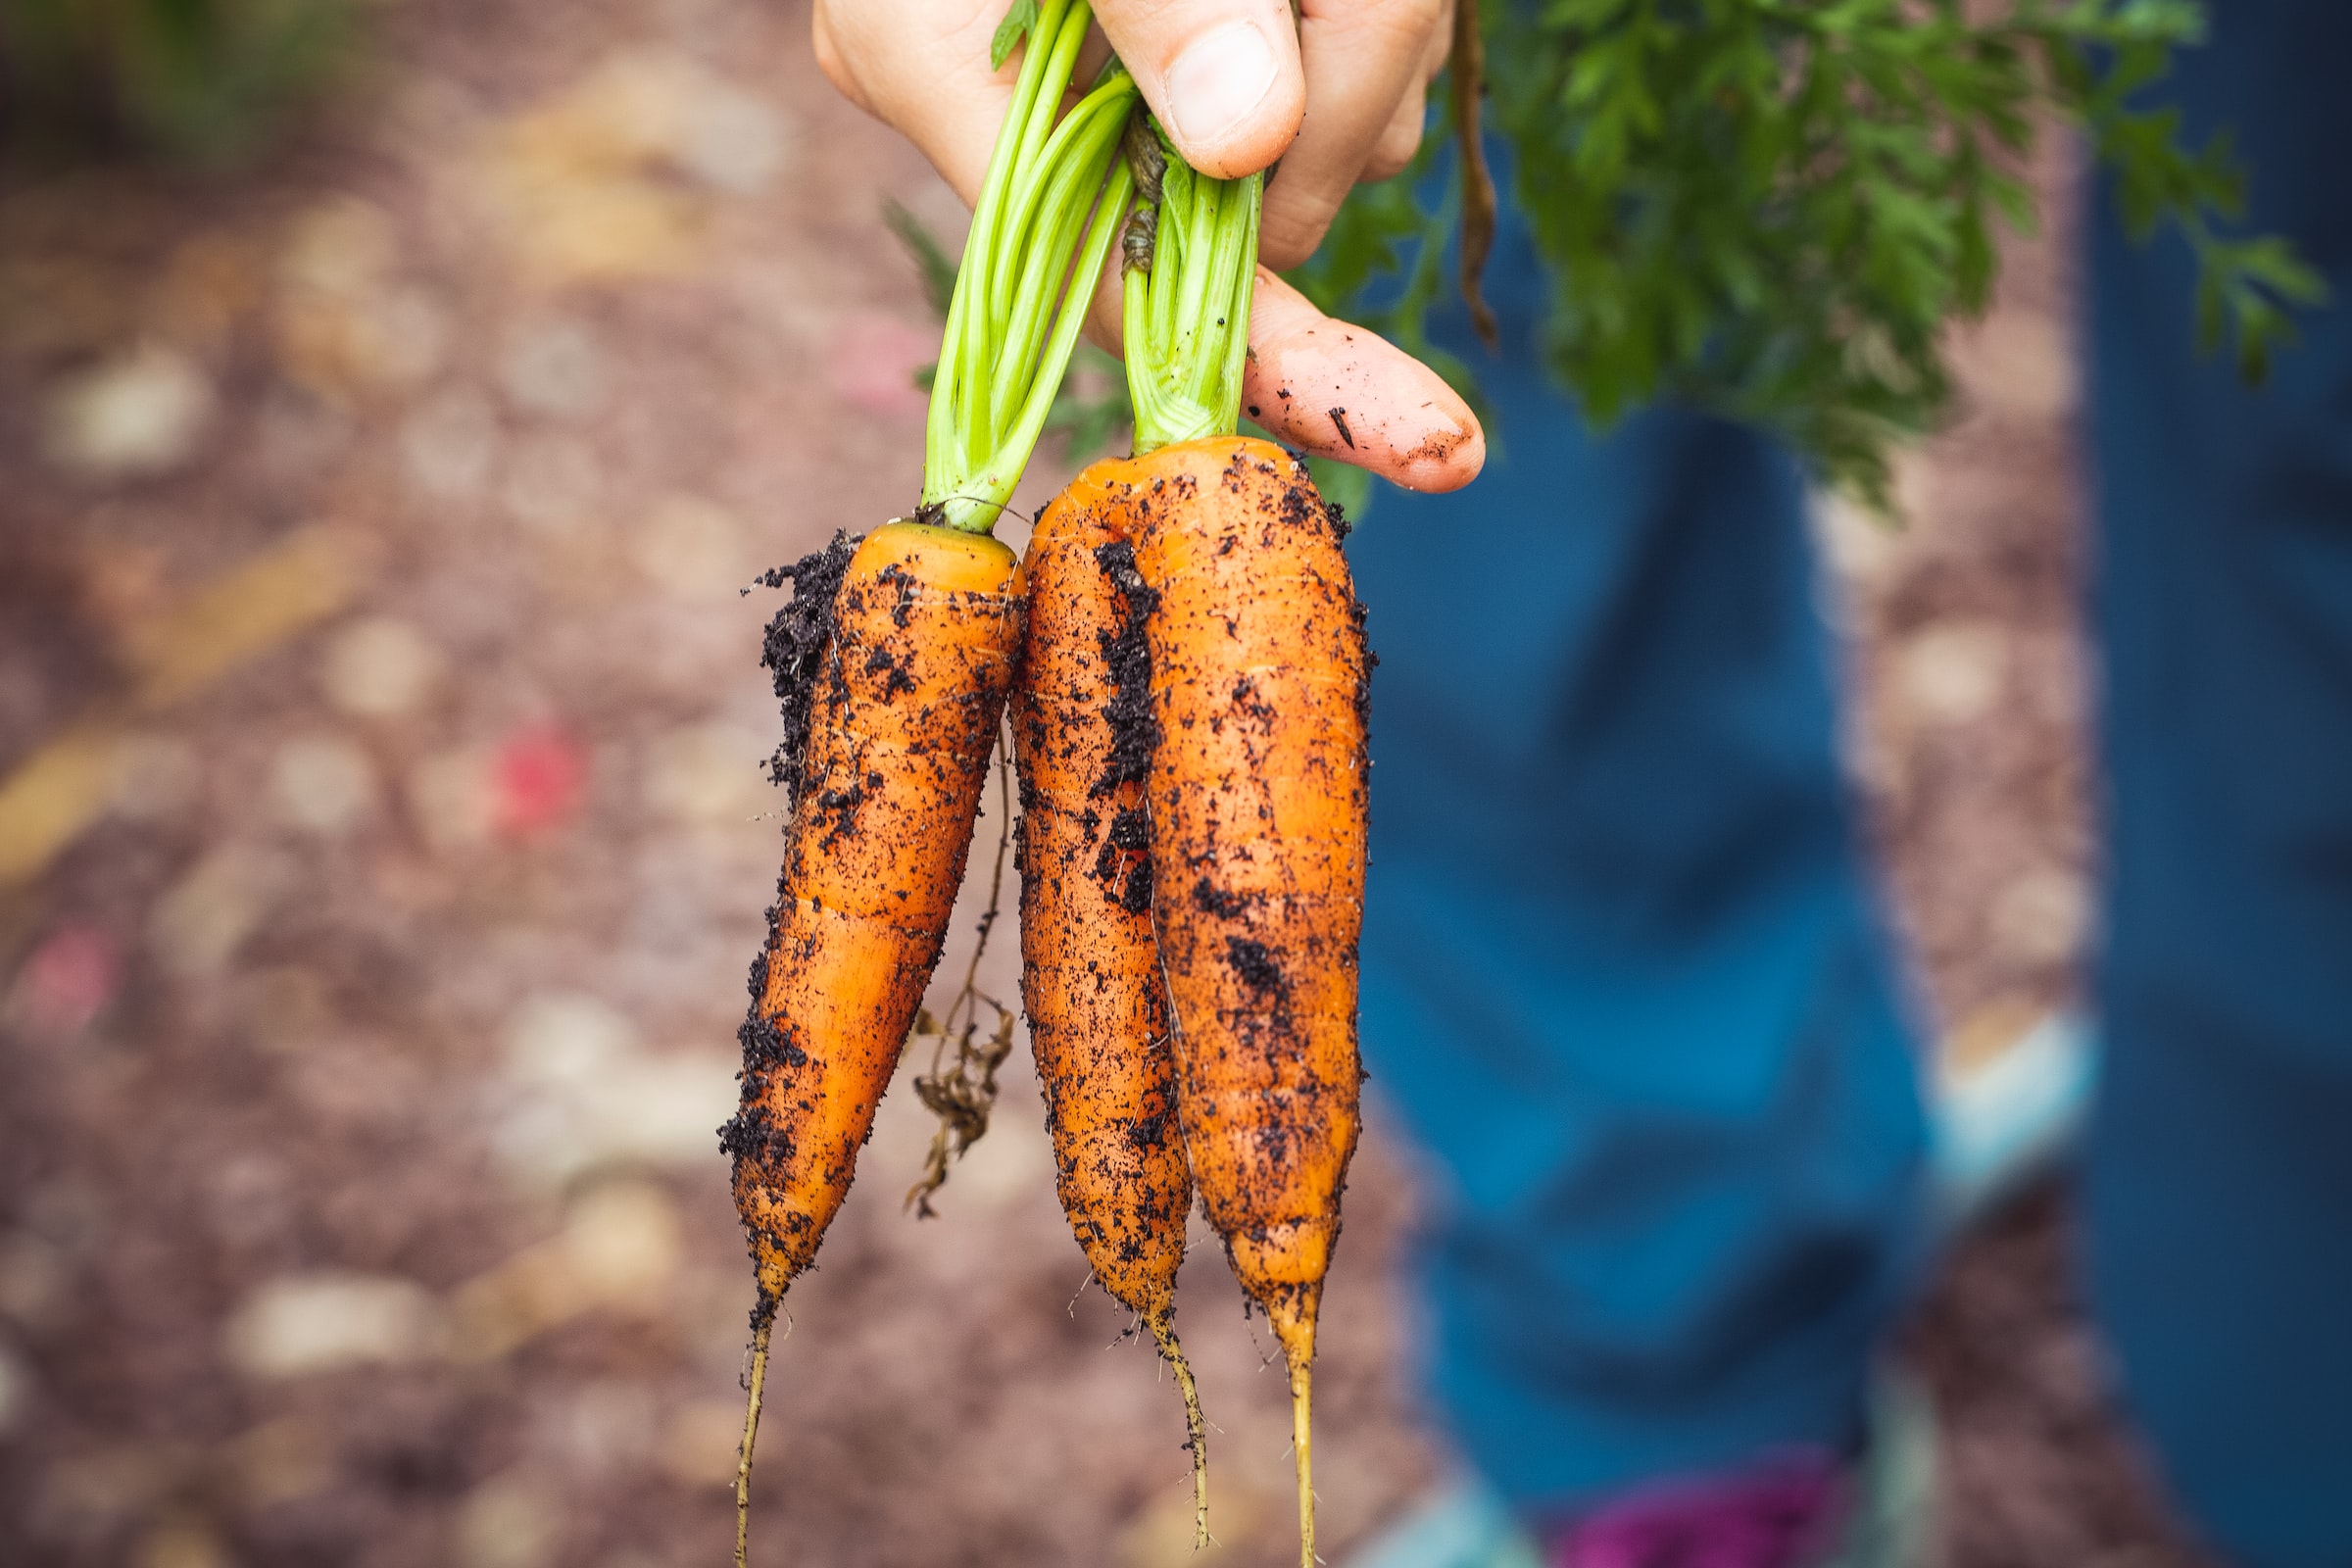 Three small carrots pulled fresh from the ground